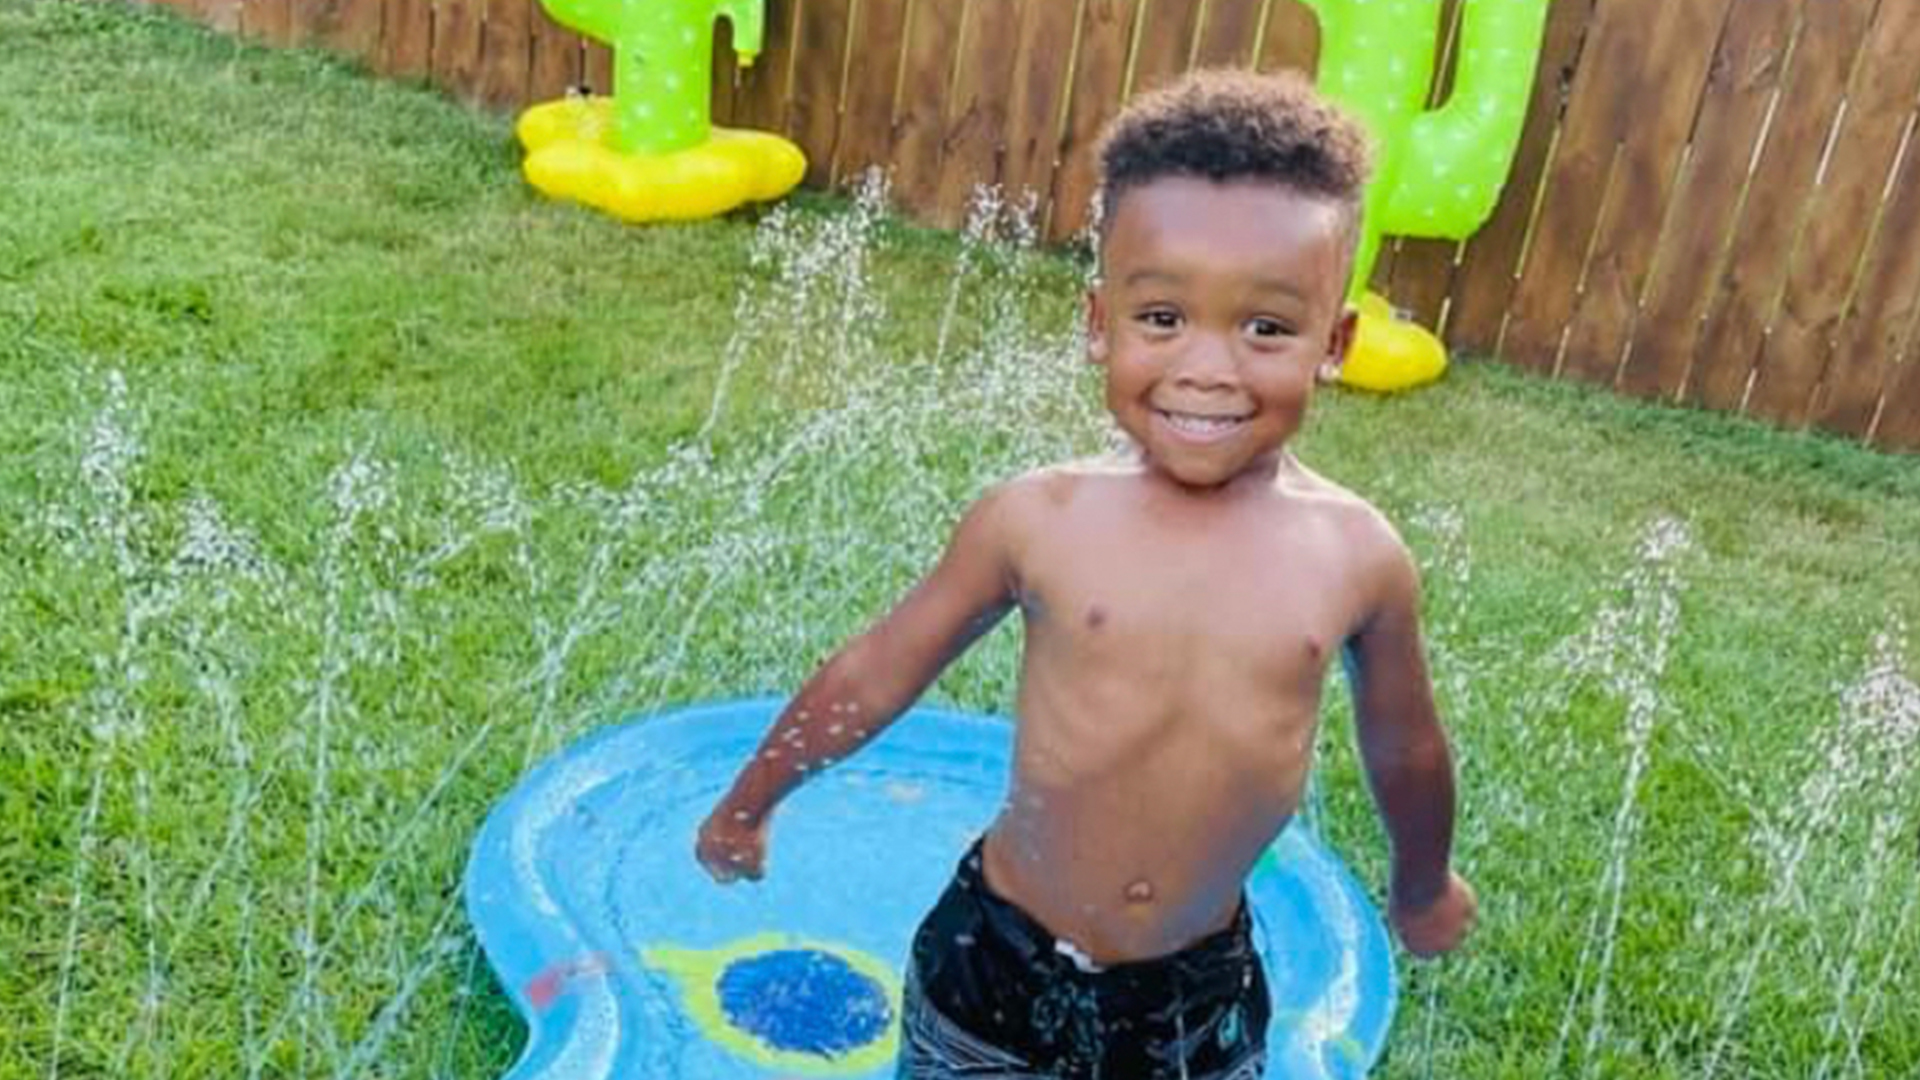 Family Speaks Out After Four-Year-Old Boy Drowns To Death During Supervised Swim Lessons (Exclusive)